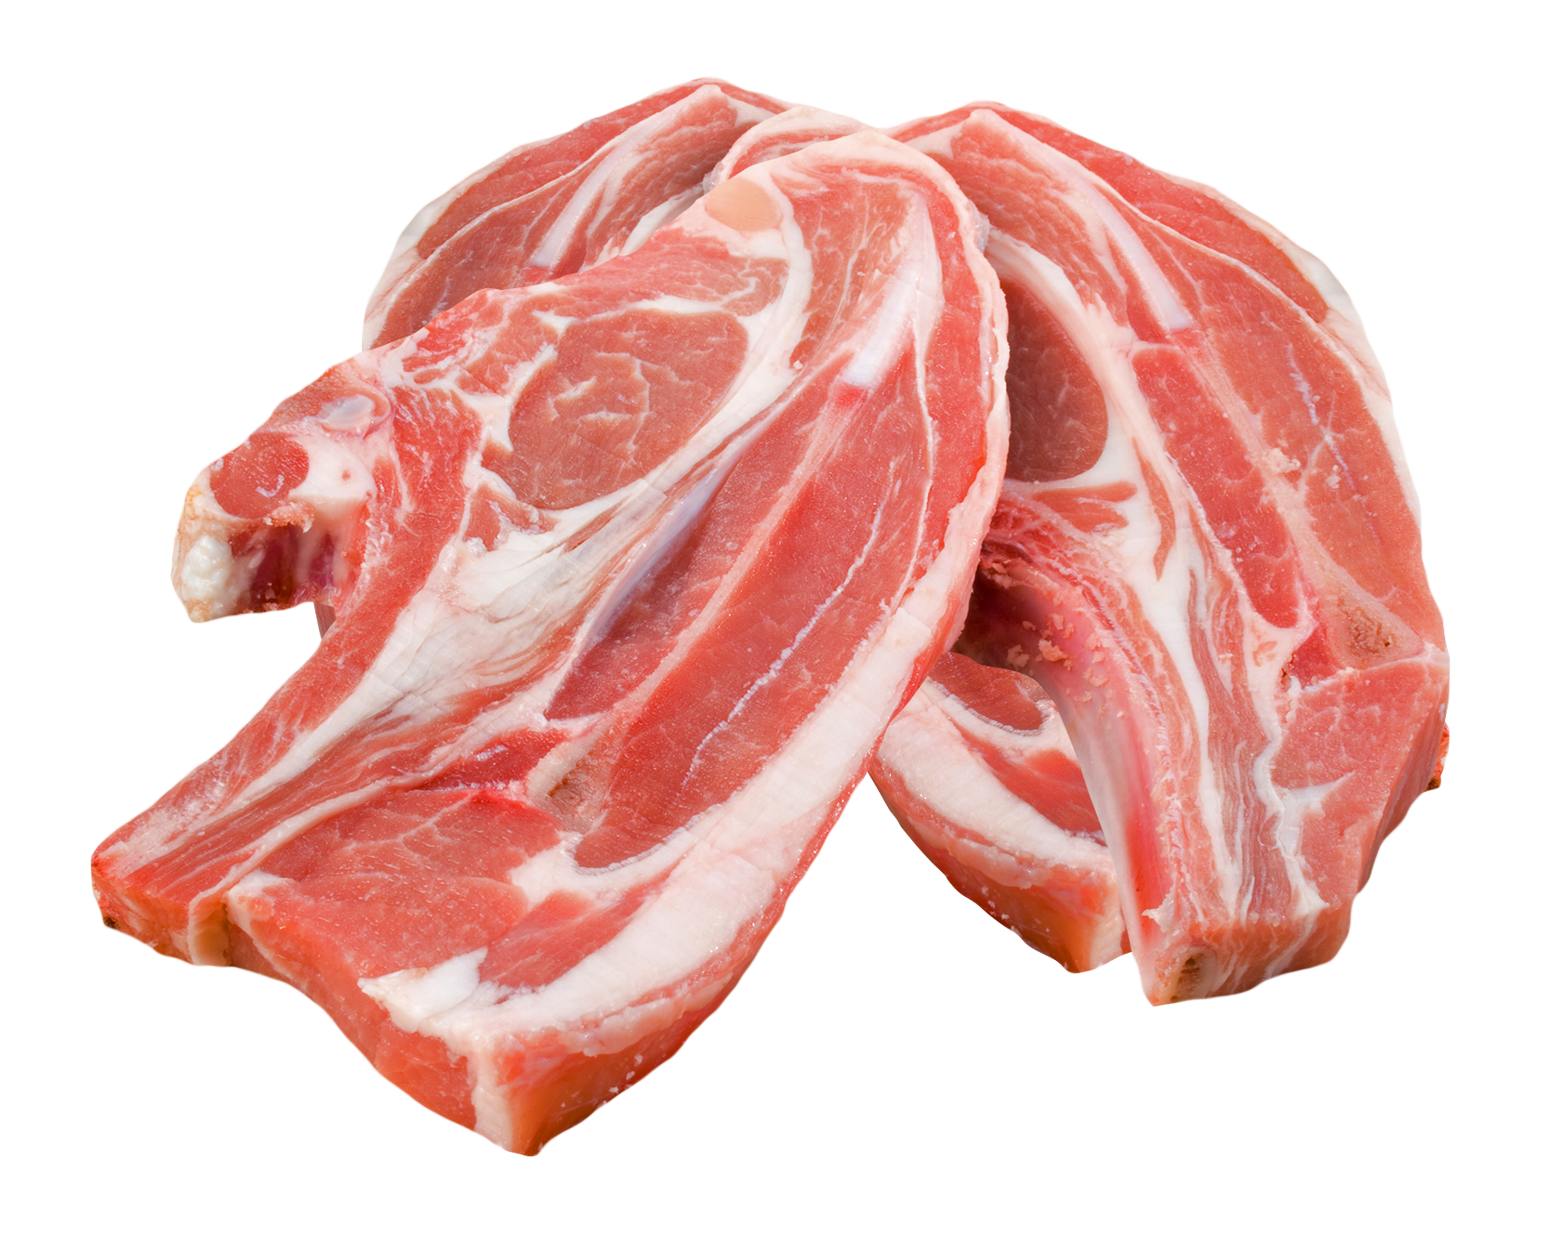 Beef PNG Image File